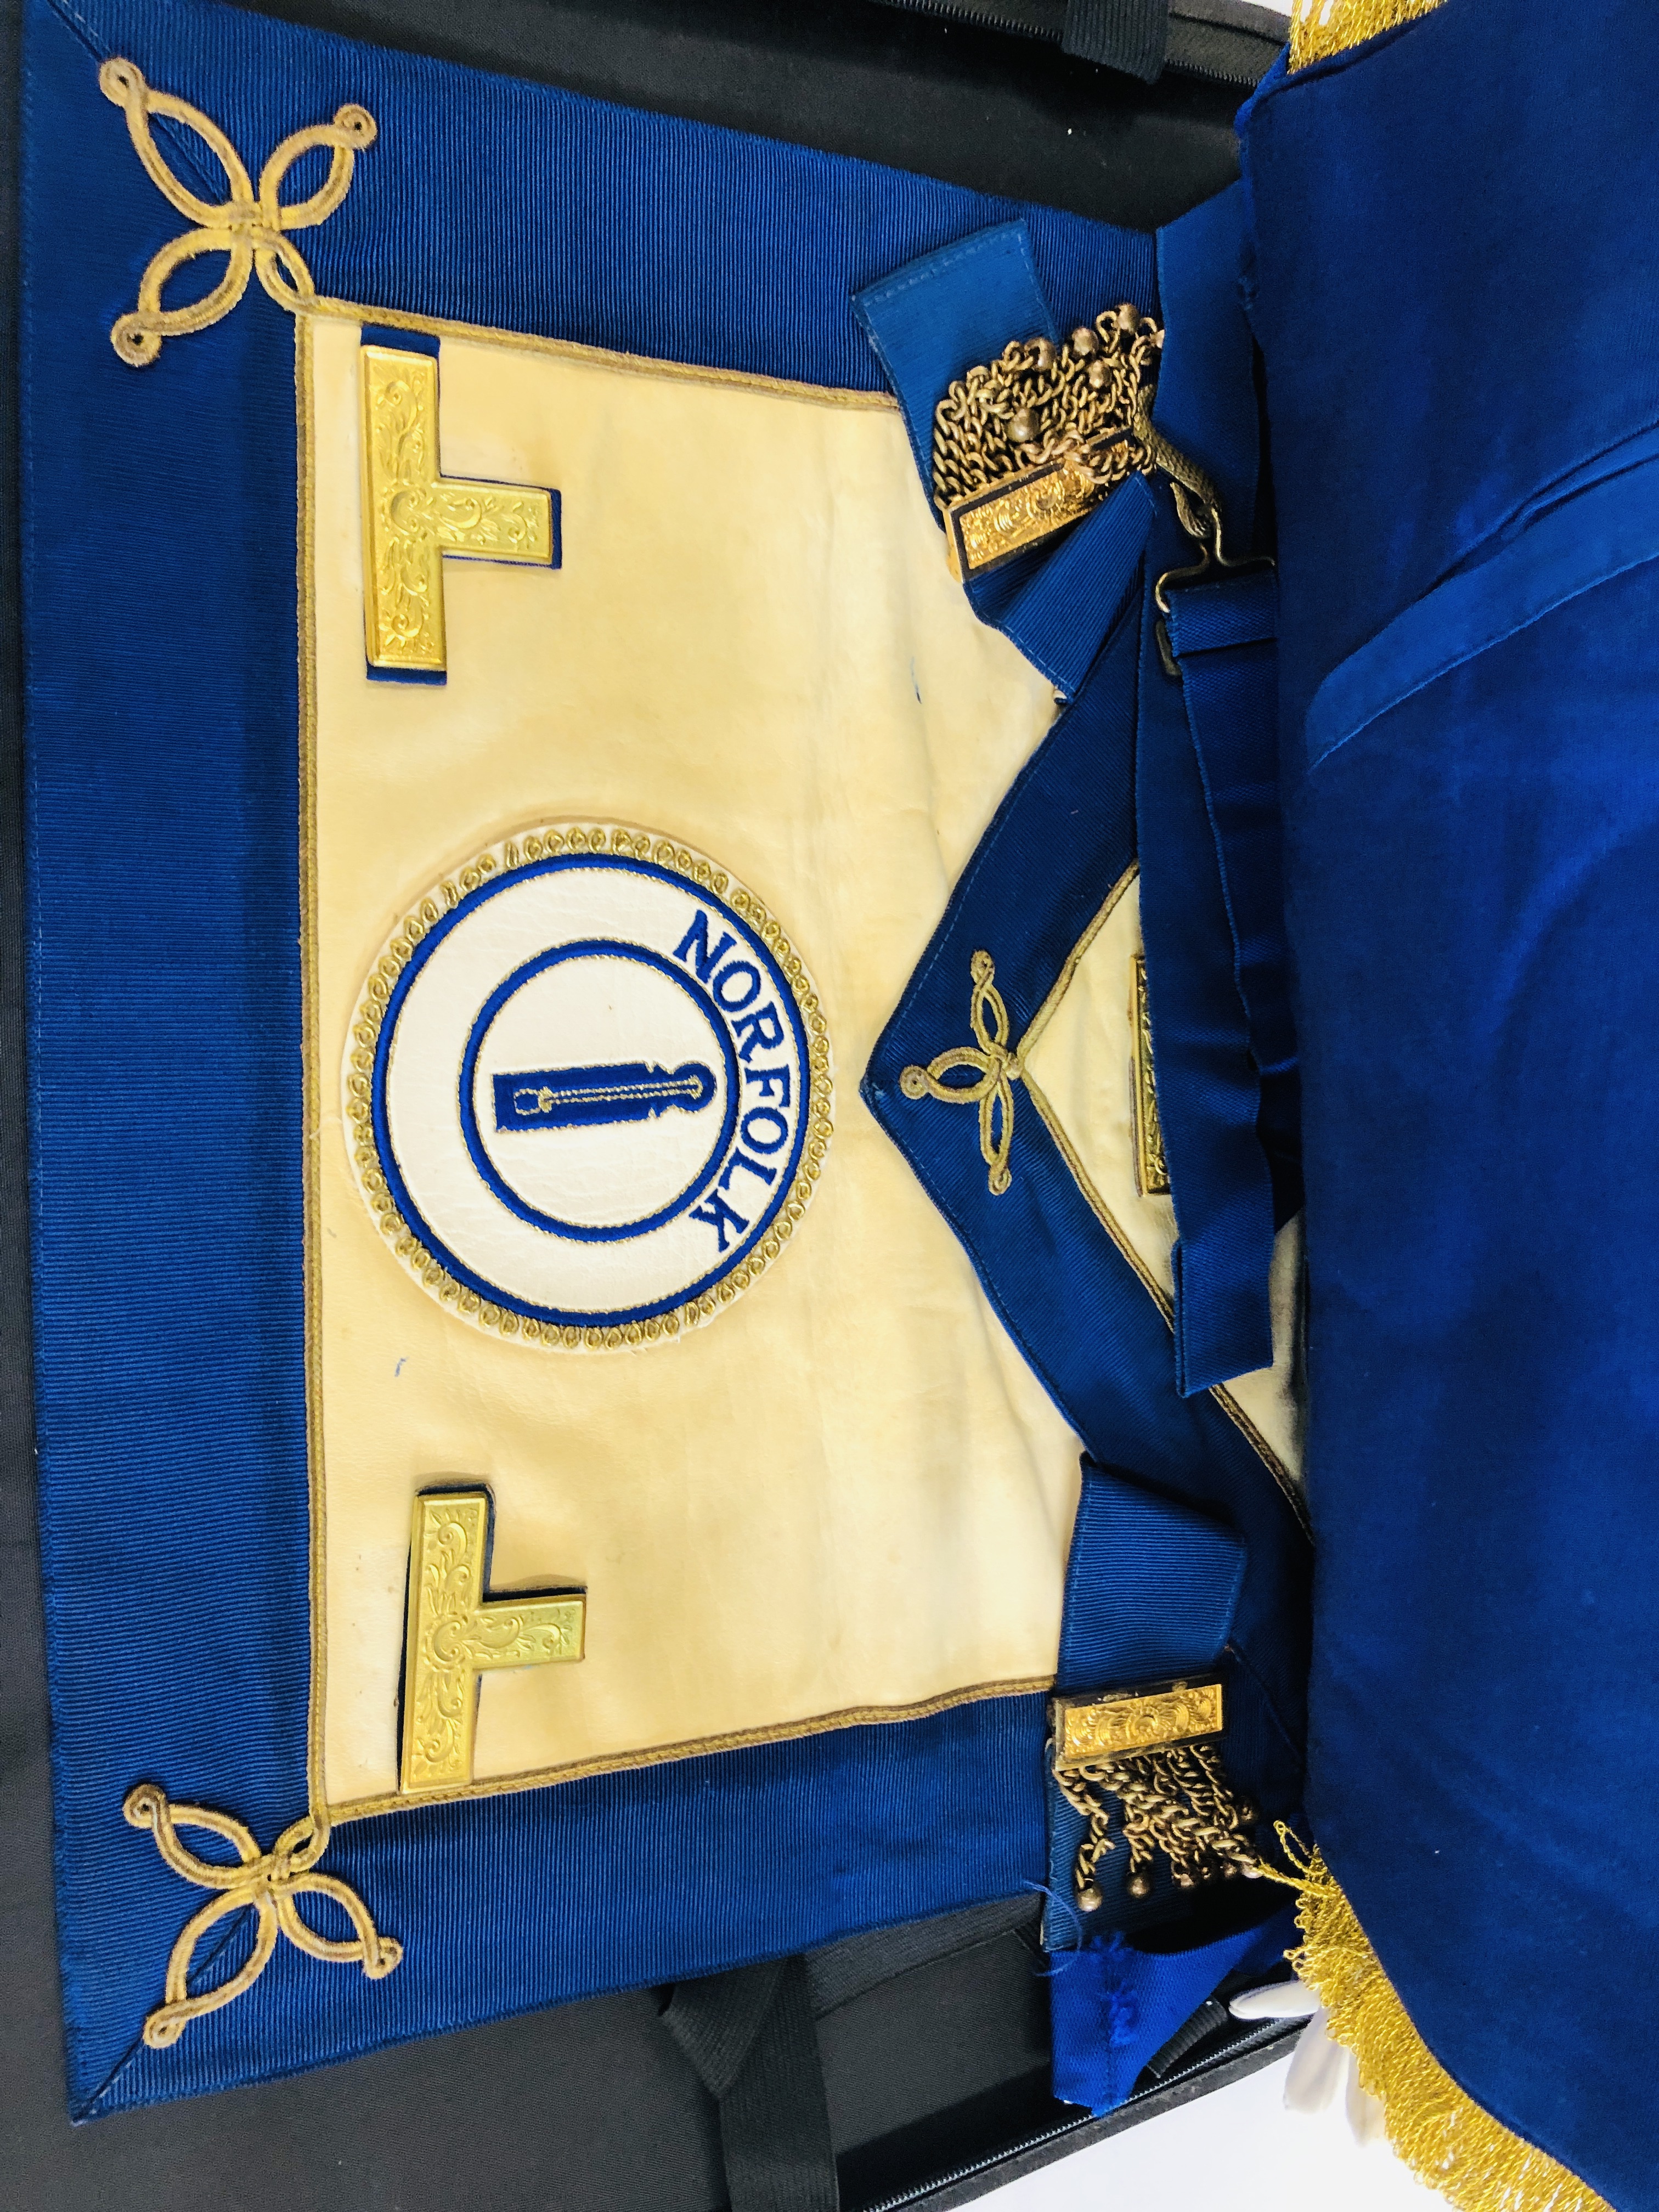 A GROUP OF "SUFFOLK" MASONIC REGALIA IN CARRY CASE. - Image 4 of 4